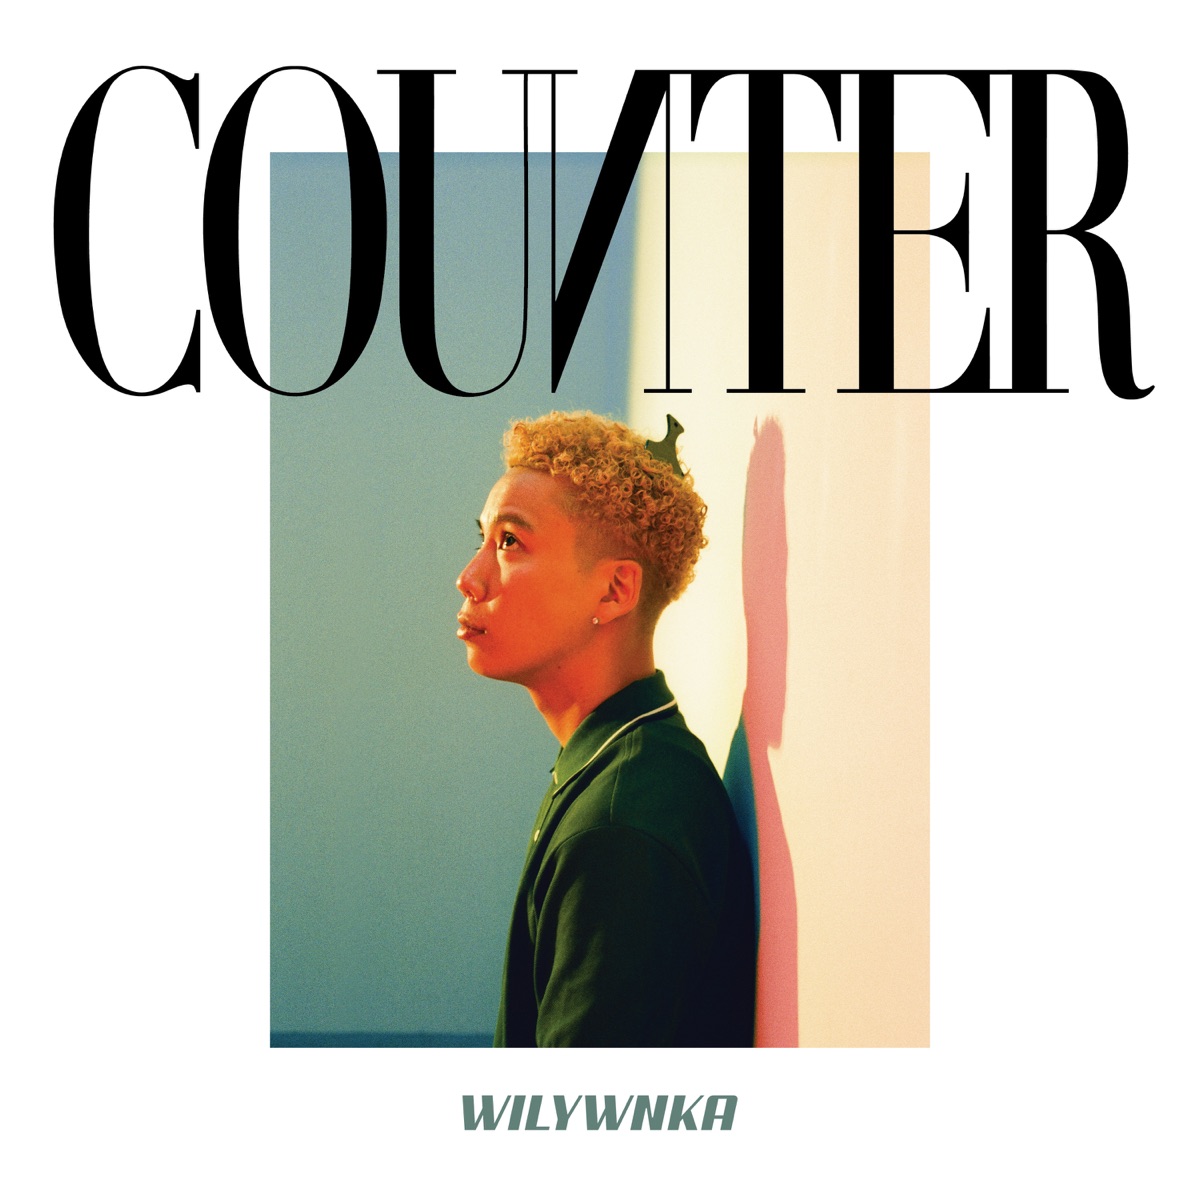 Cover art for『WILYWNKA - Super Cypher (feat. Leon Fanourakis)』from the release『COUNTER』